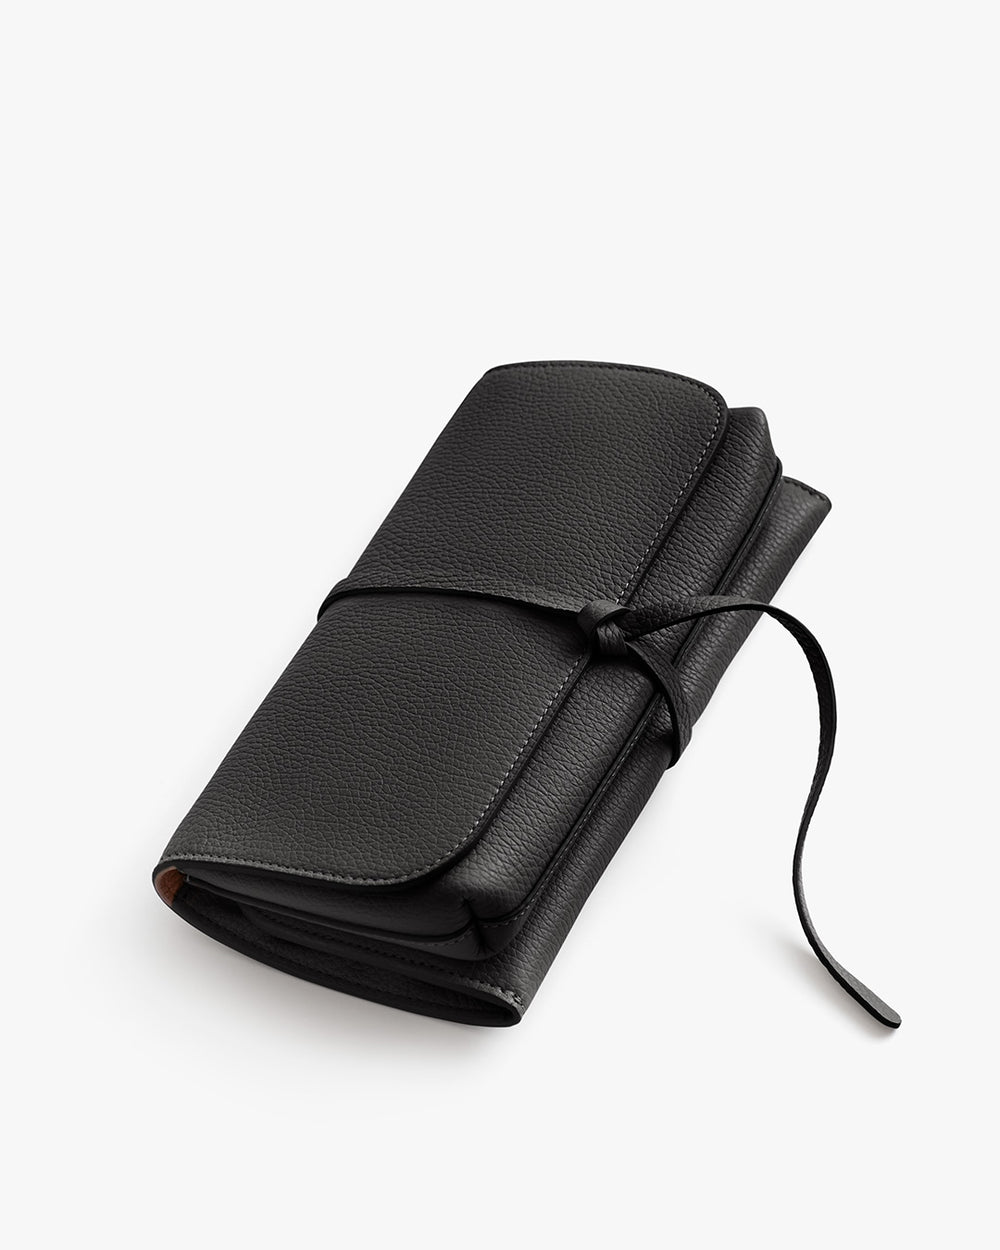 Closed black wallet with a wrap-around tie on a light background.